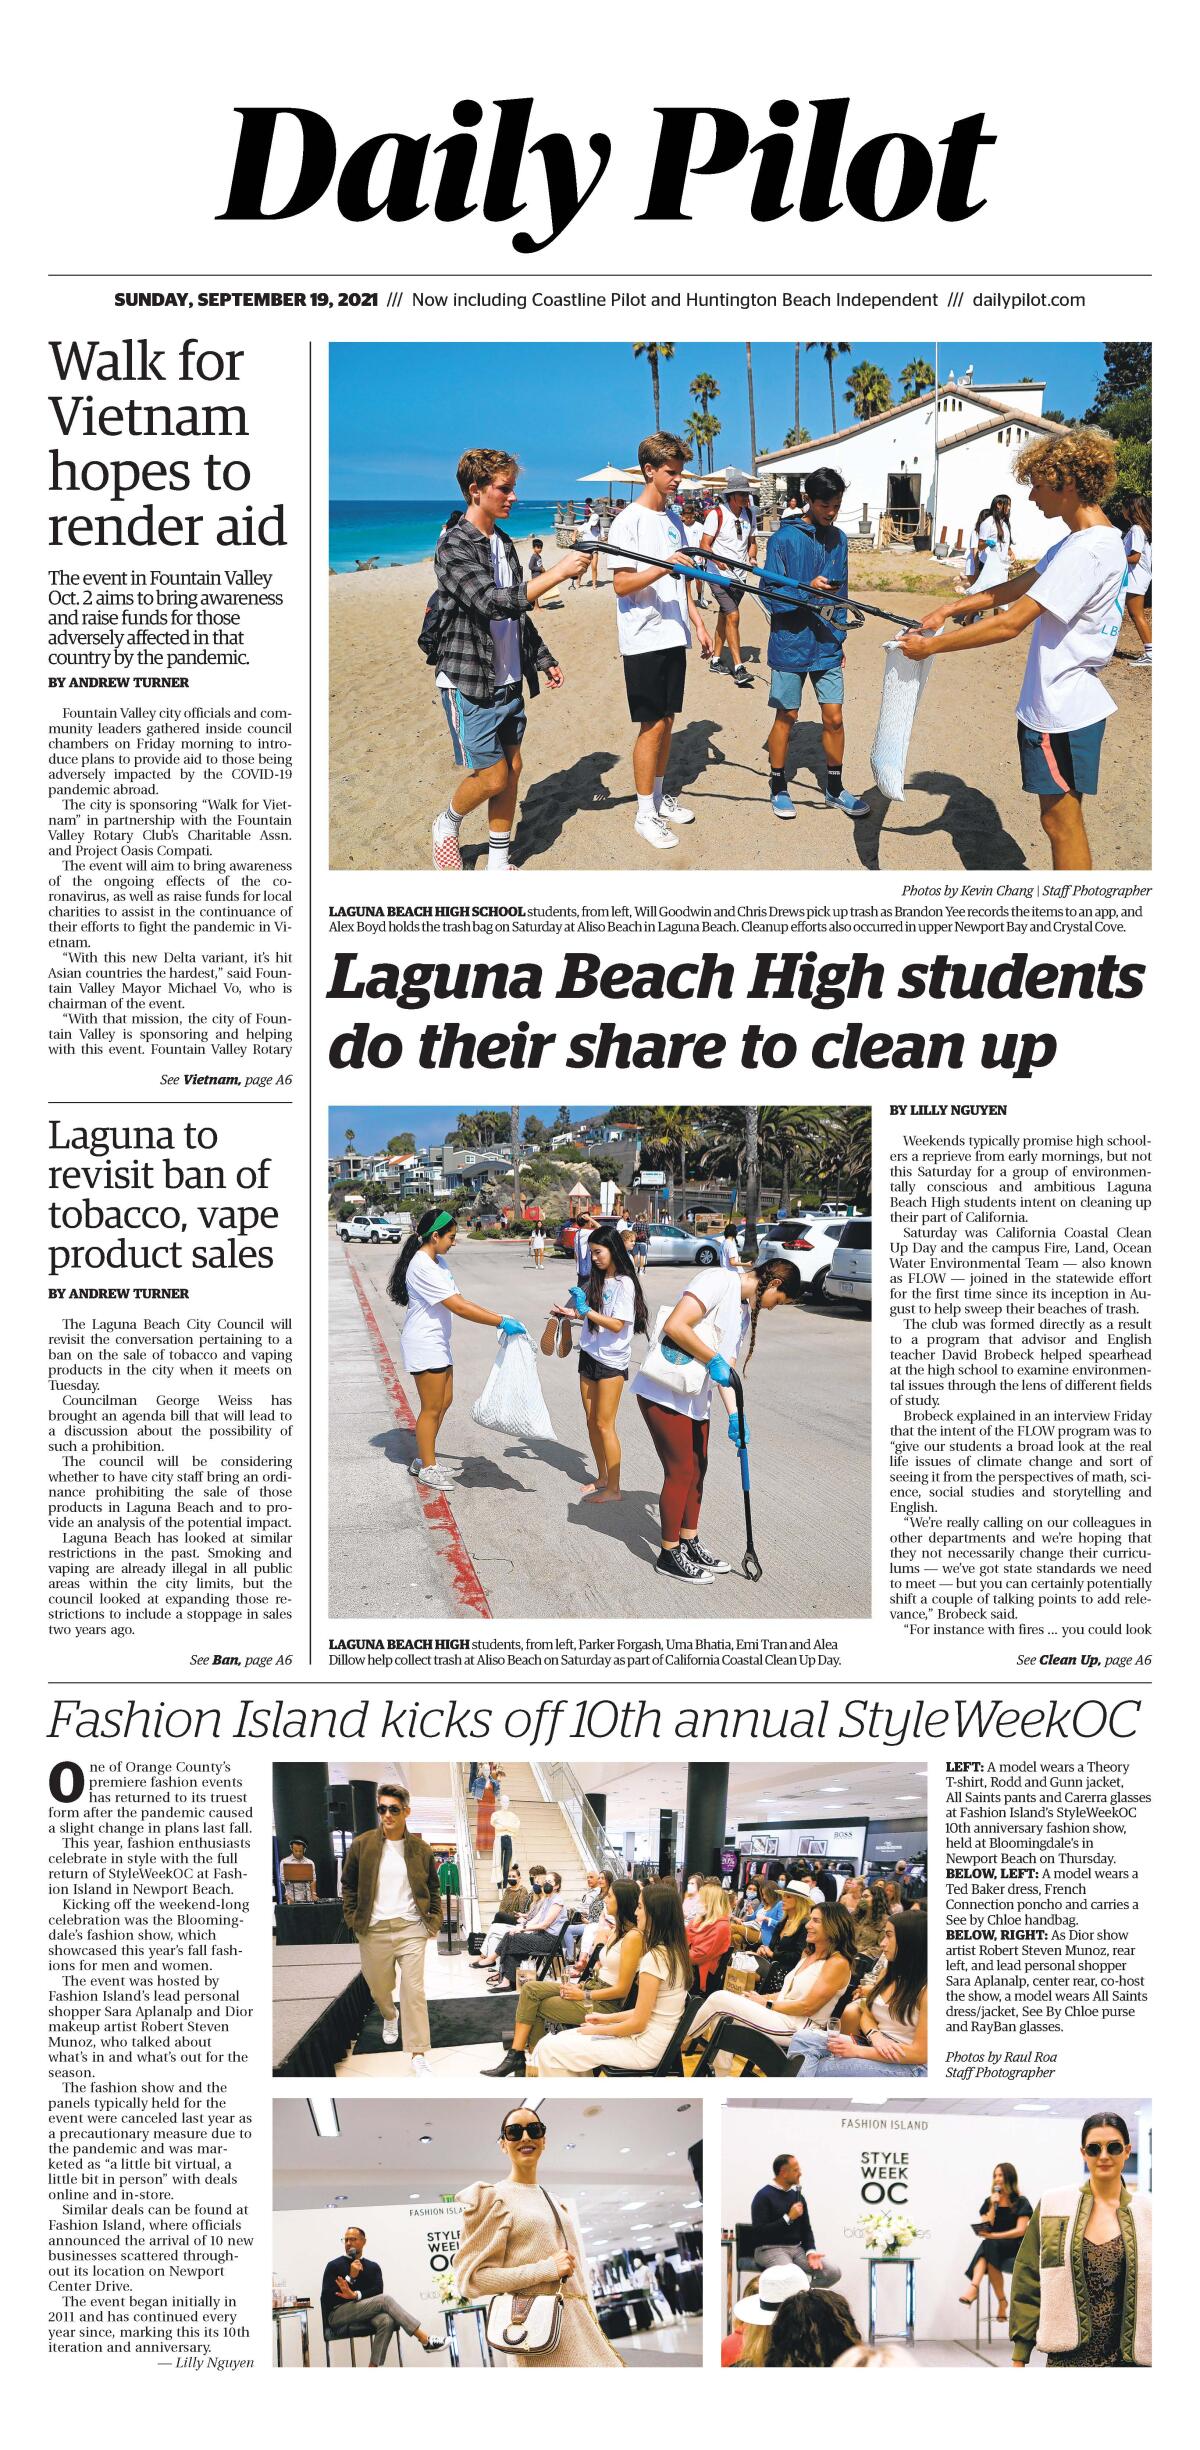 Front page of Daily Pilot e-newspaper for Sunday, Sept. 19, 2021.